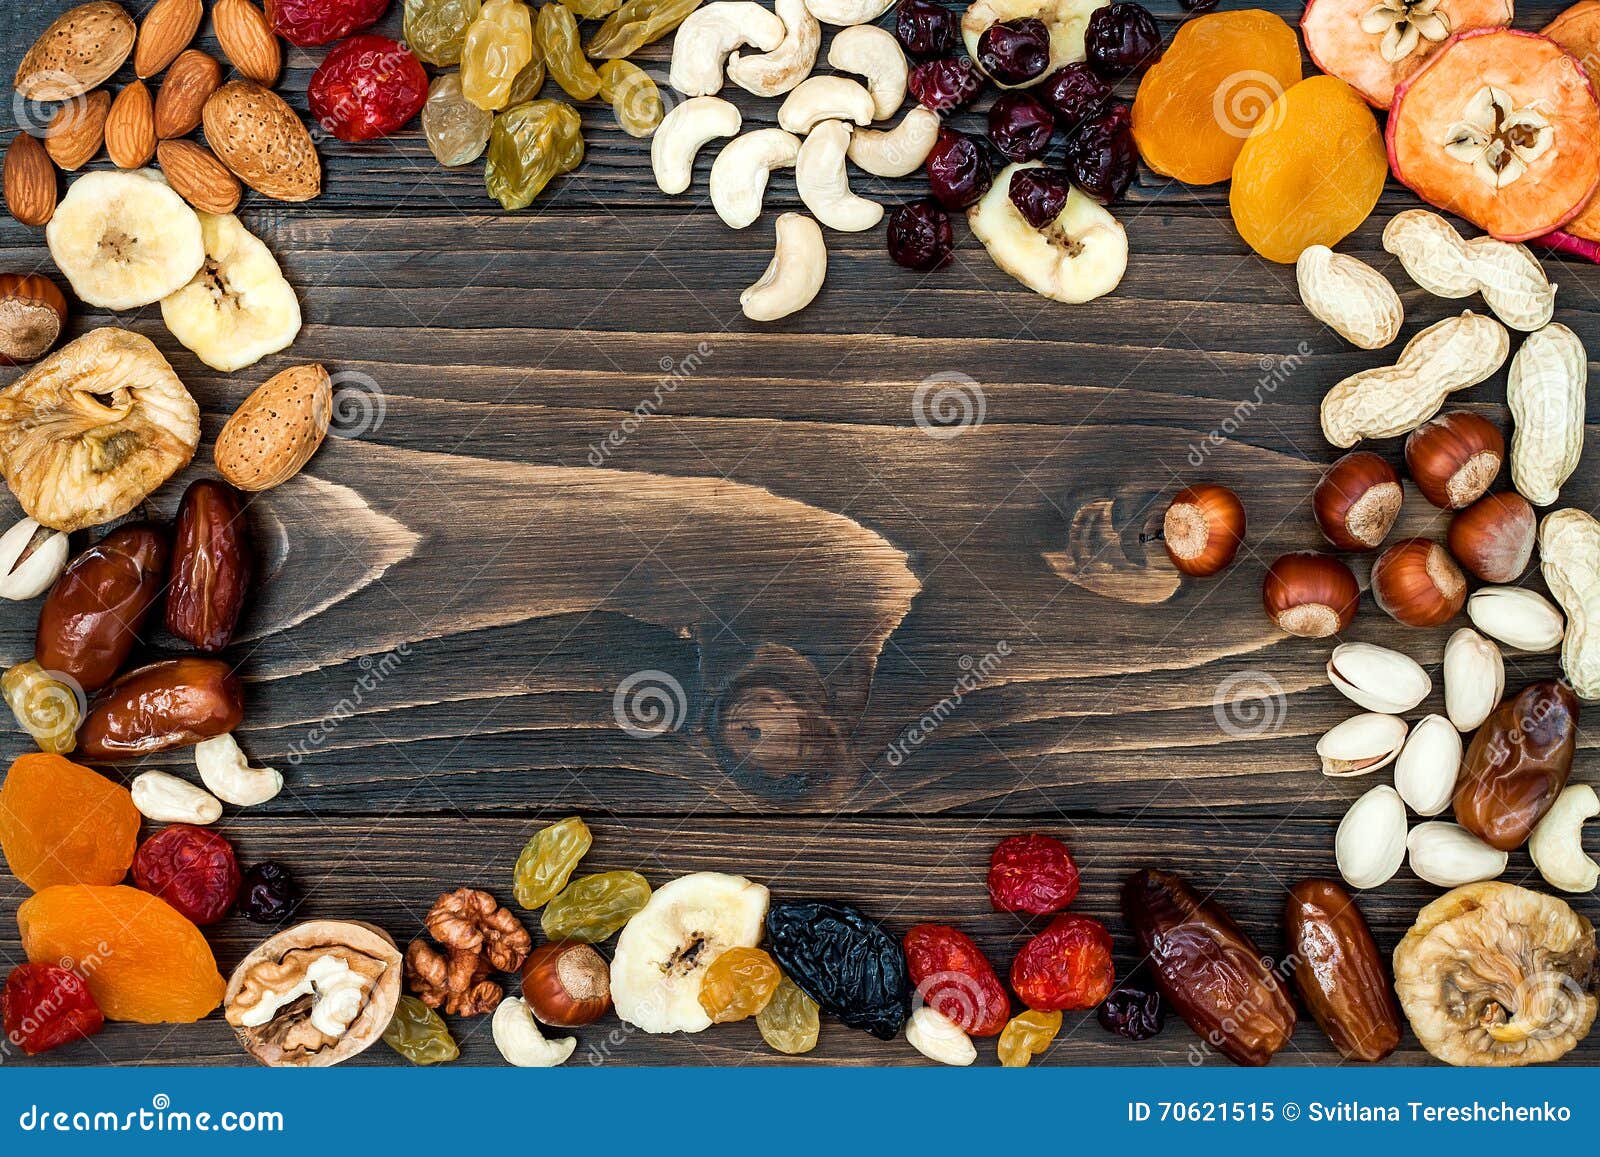 mix of dried fruits and nuts on a dark wood background with copy space. top view. s of judaic holiday tu bishvat.